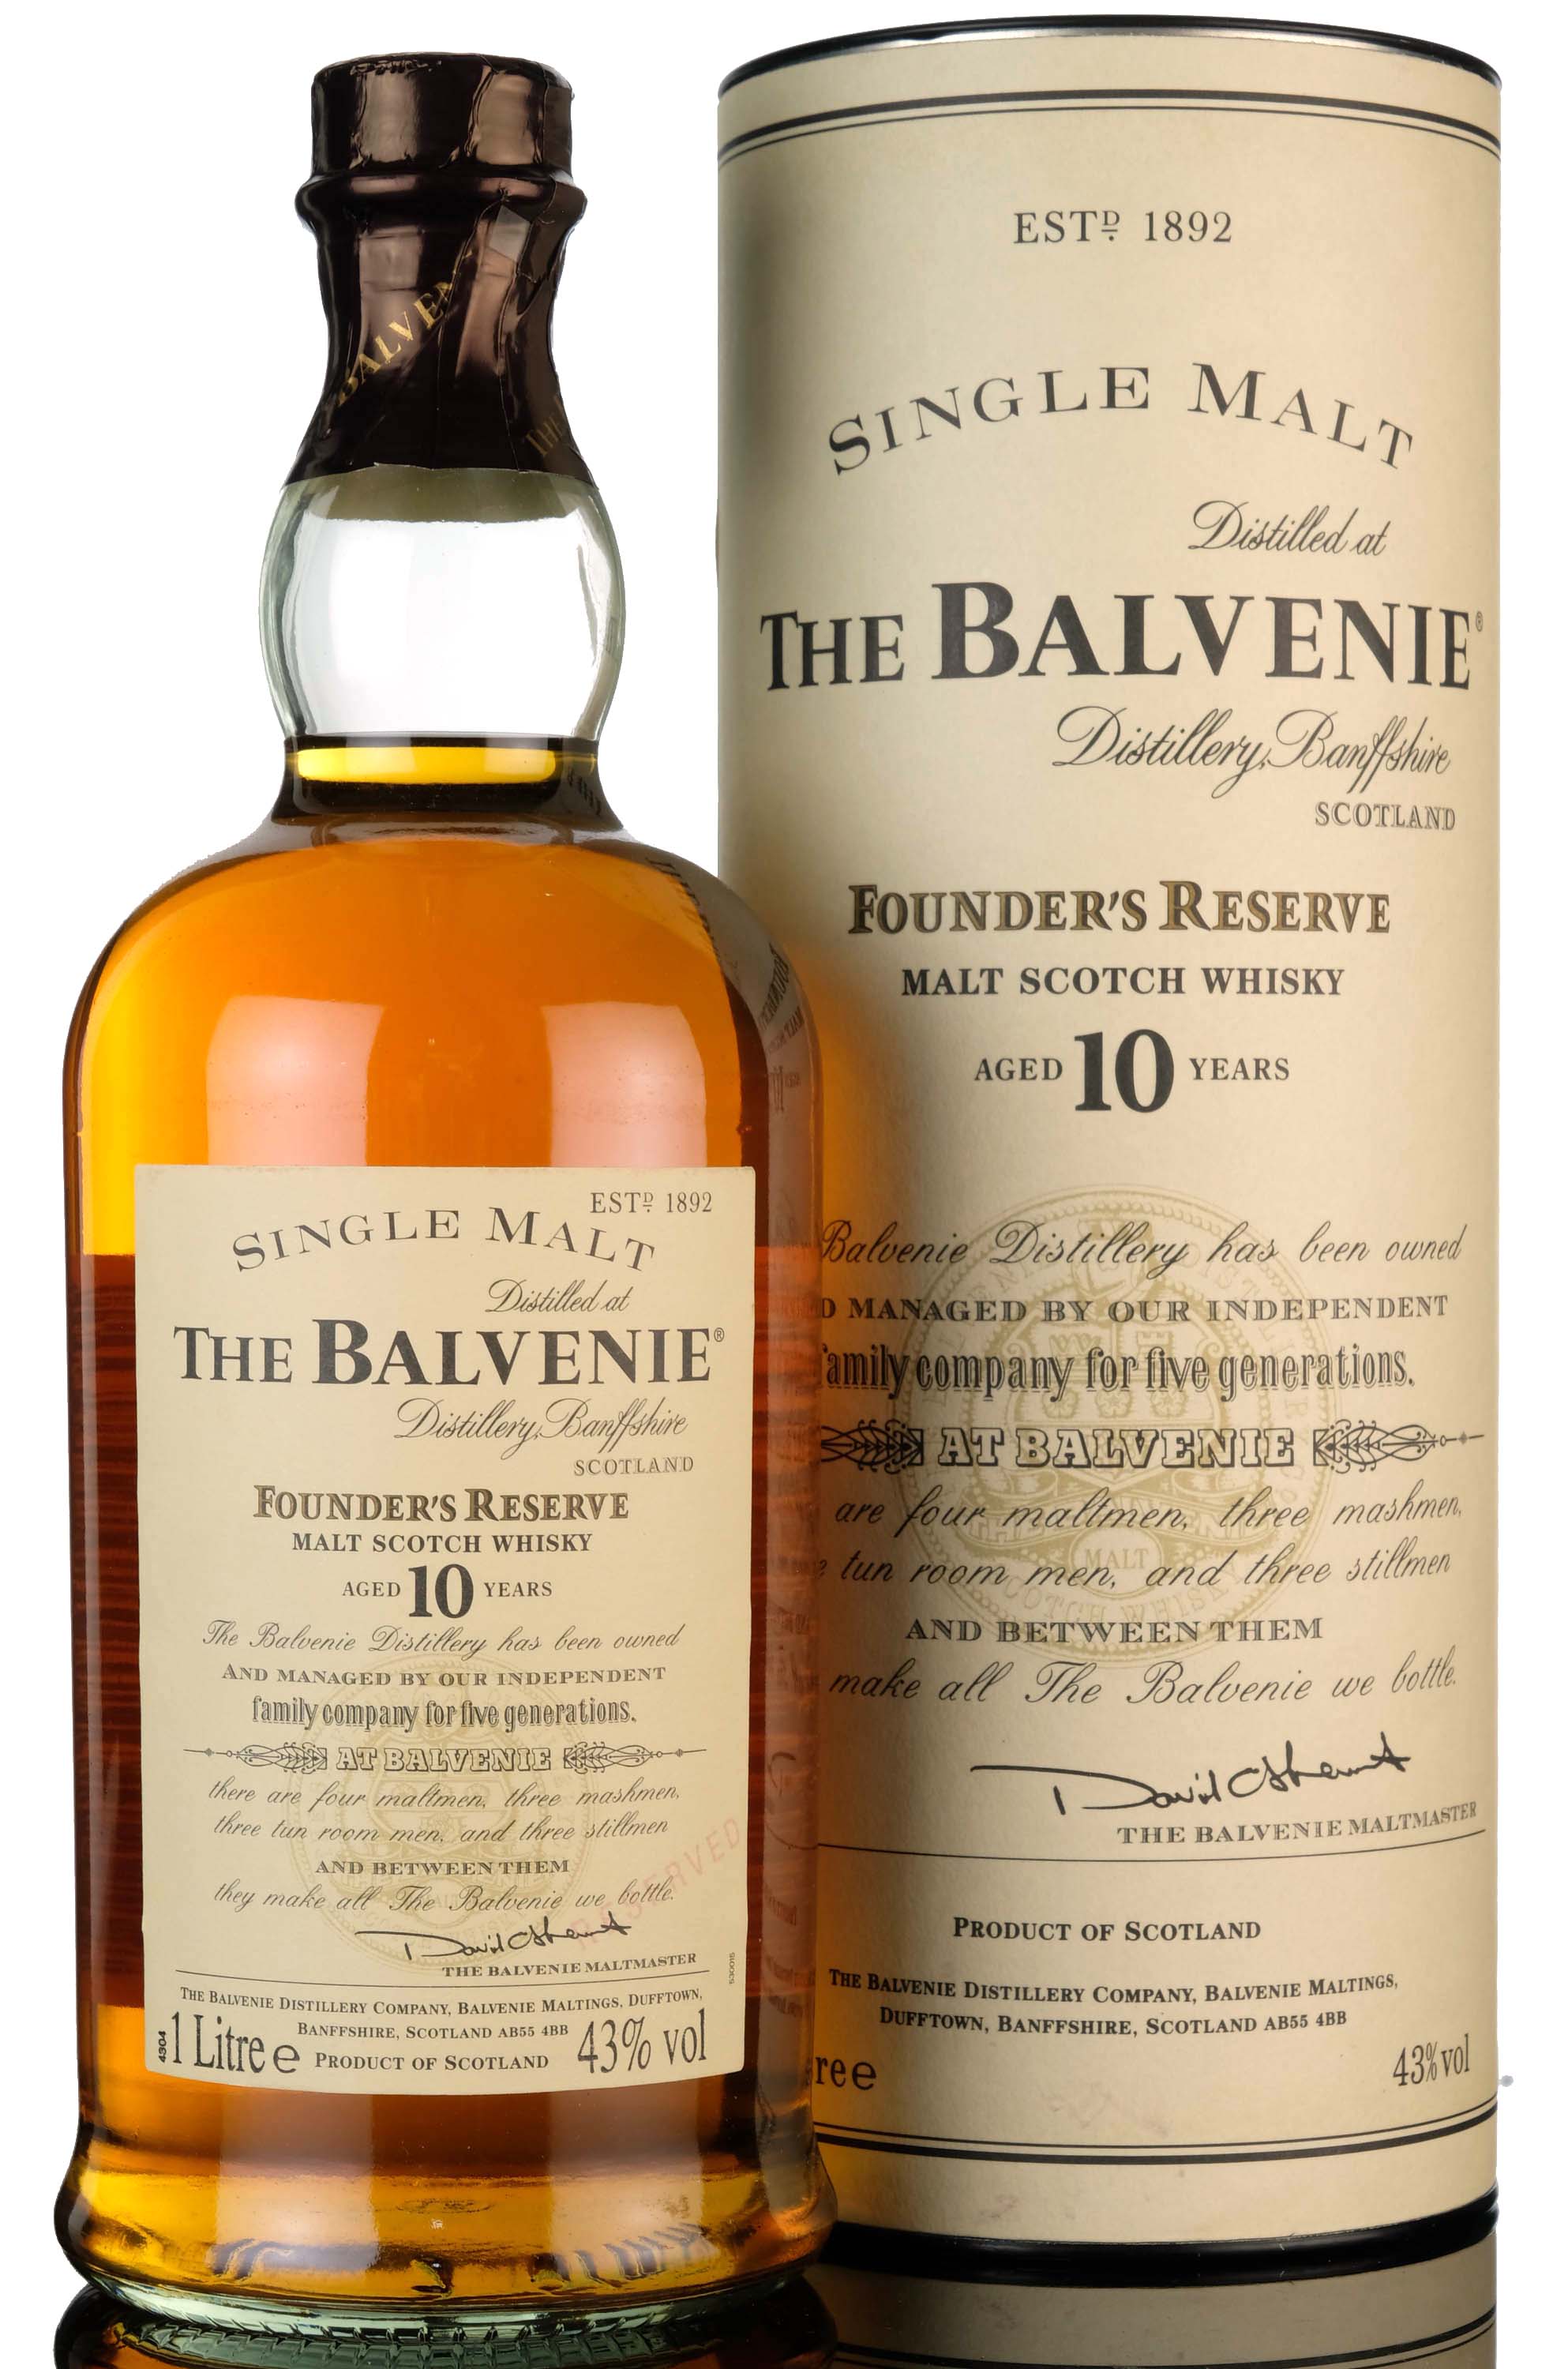 Balvenie 10 Year Old - Founders Reserve - 1 Litre